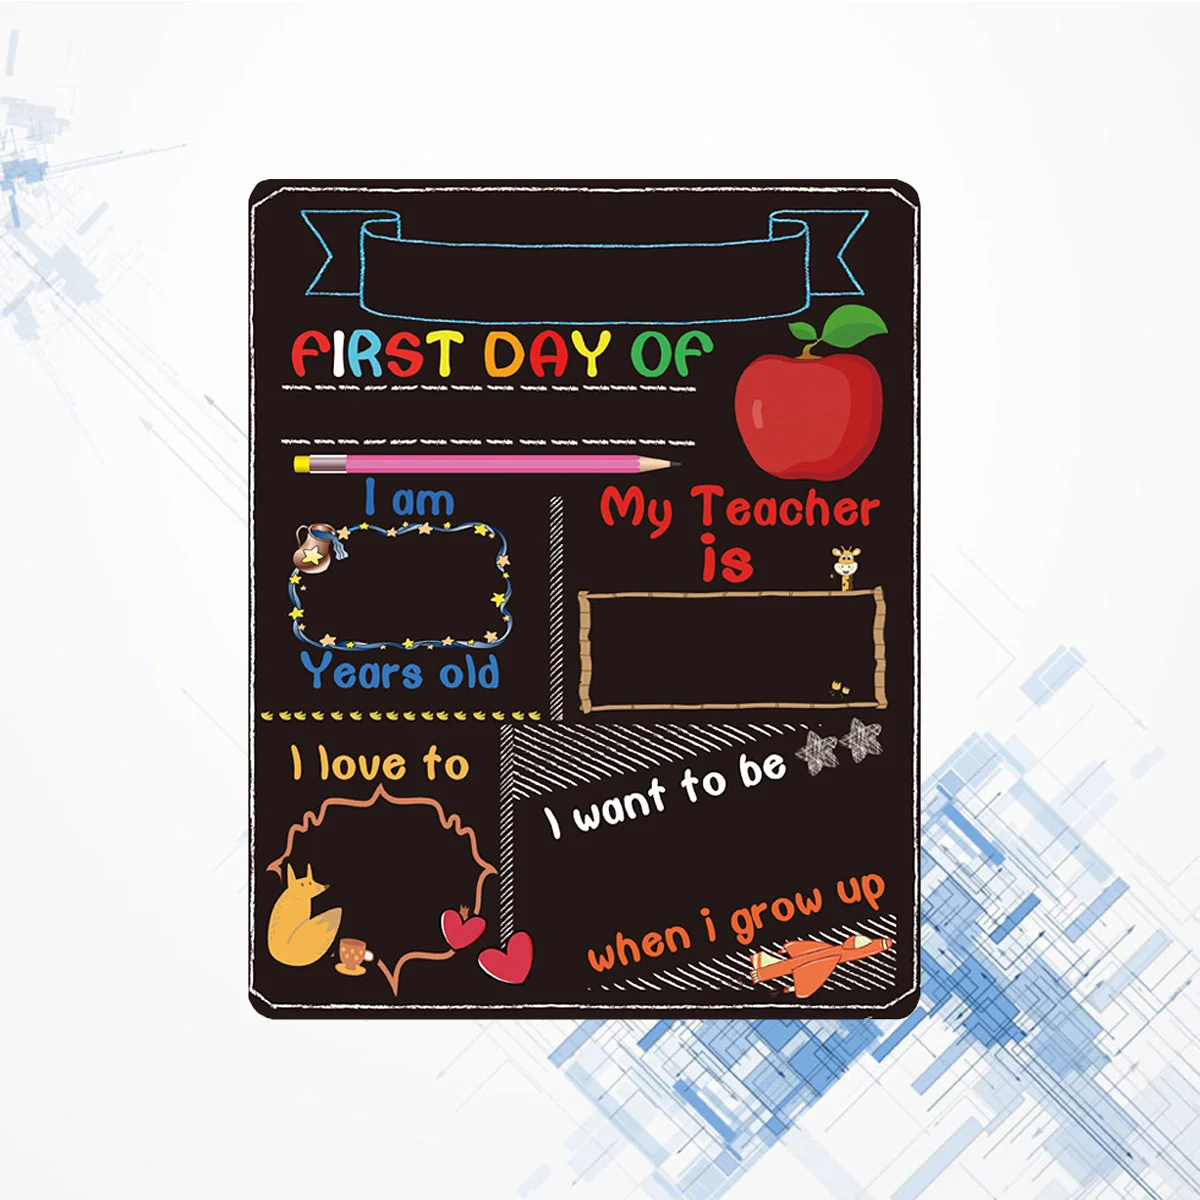 

First Day of School Board My First Day of School Chalkboard Reusable First Day of School Sign Double- Sided Milestone Photo